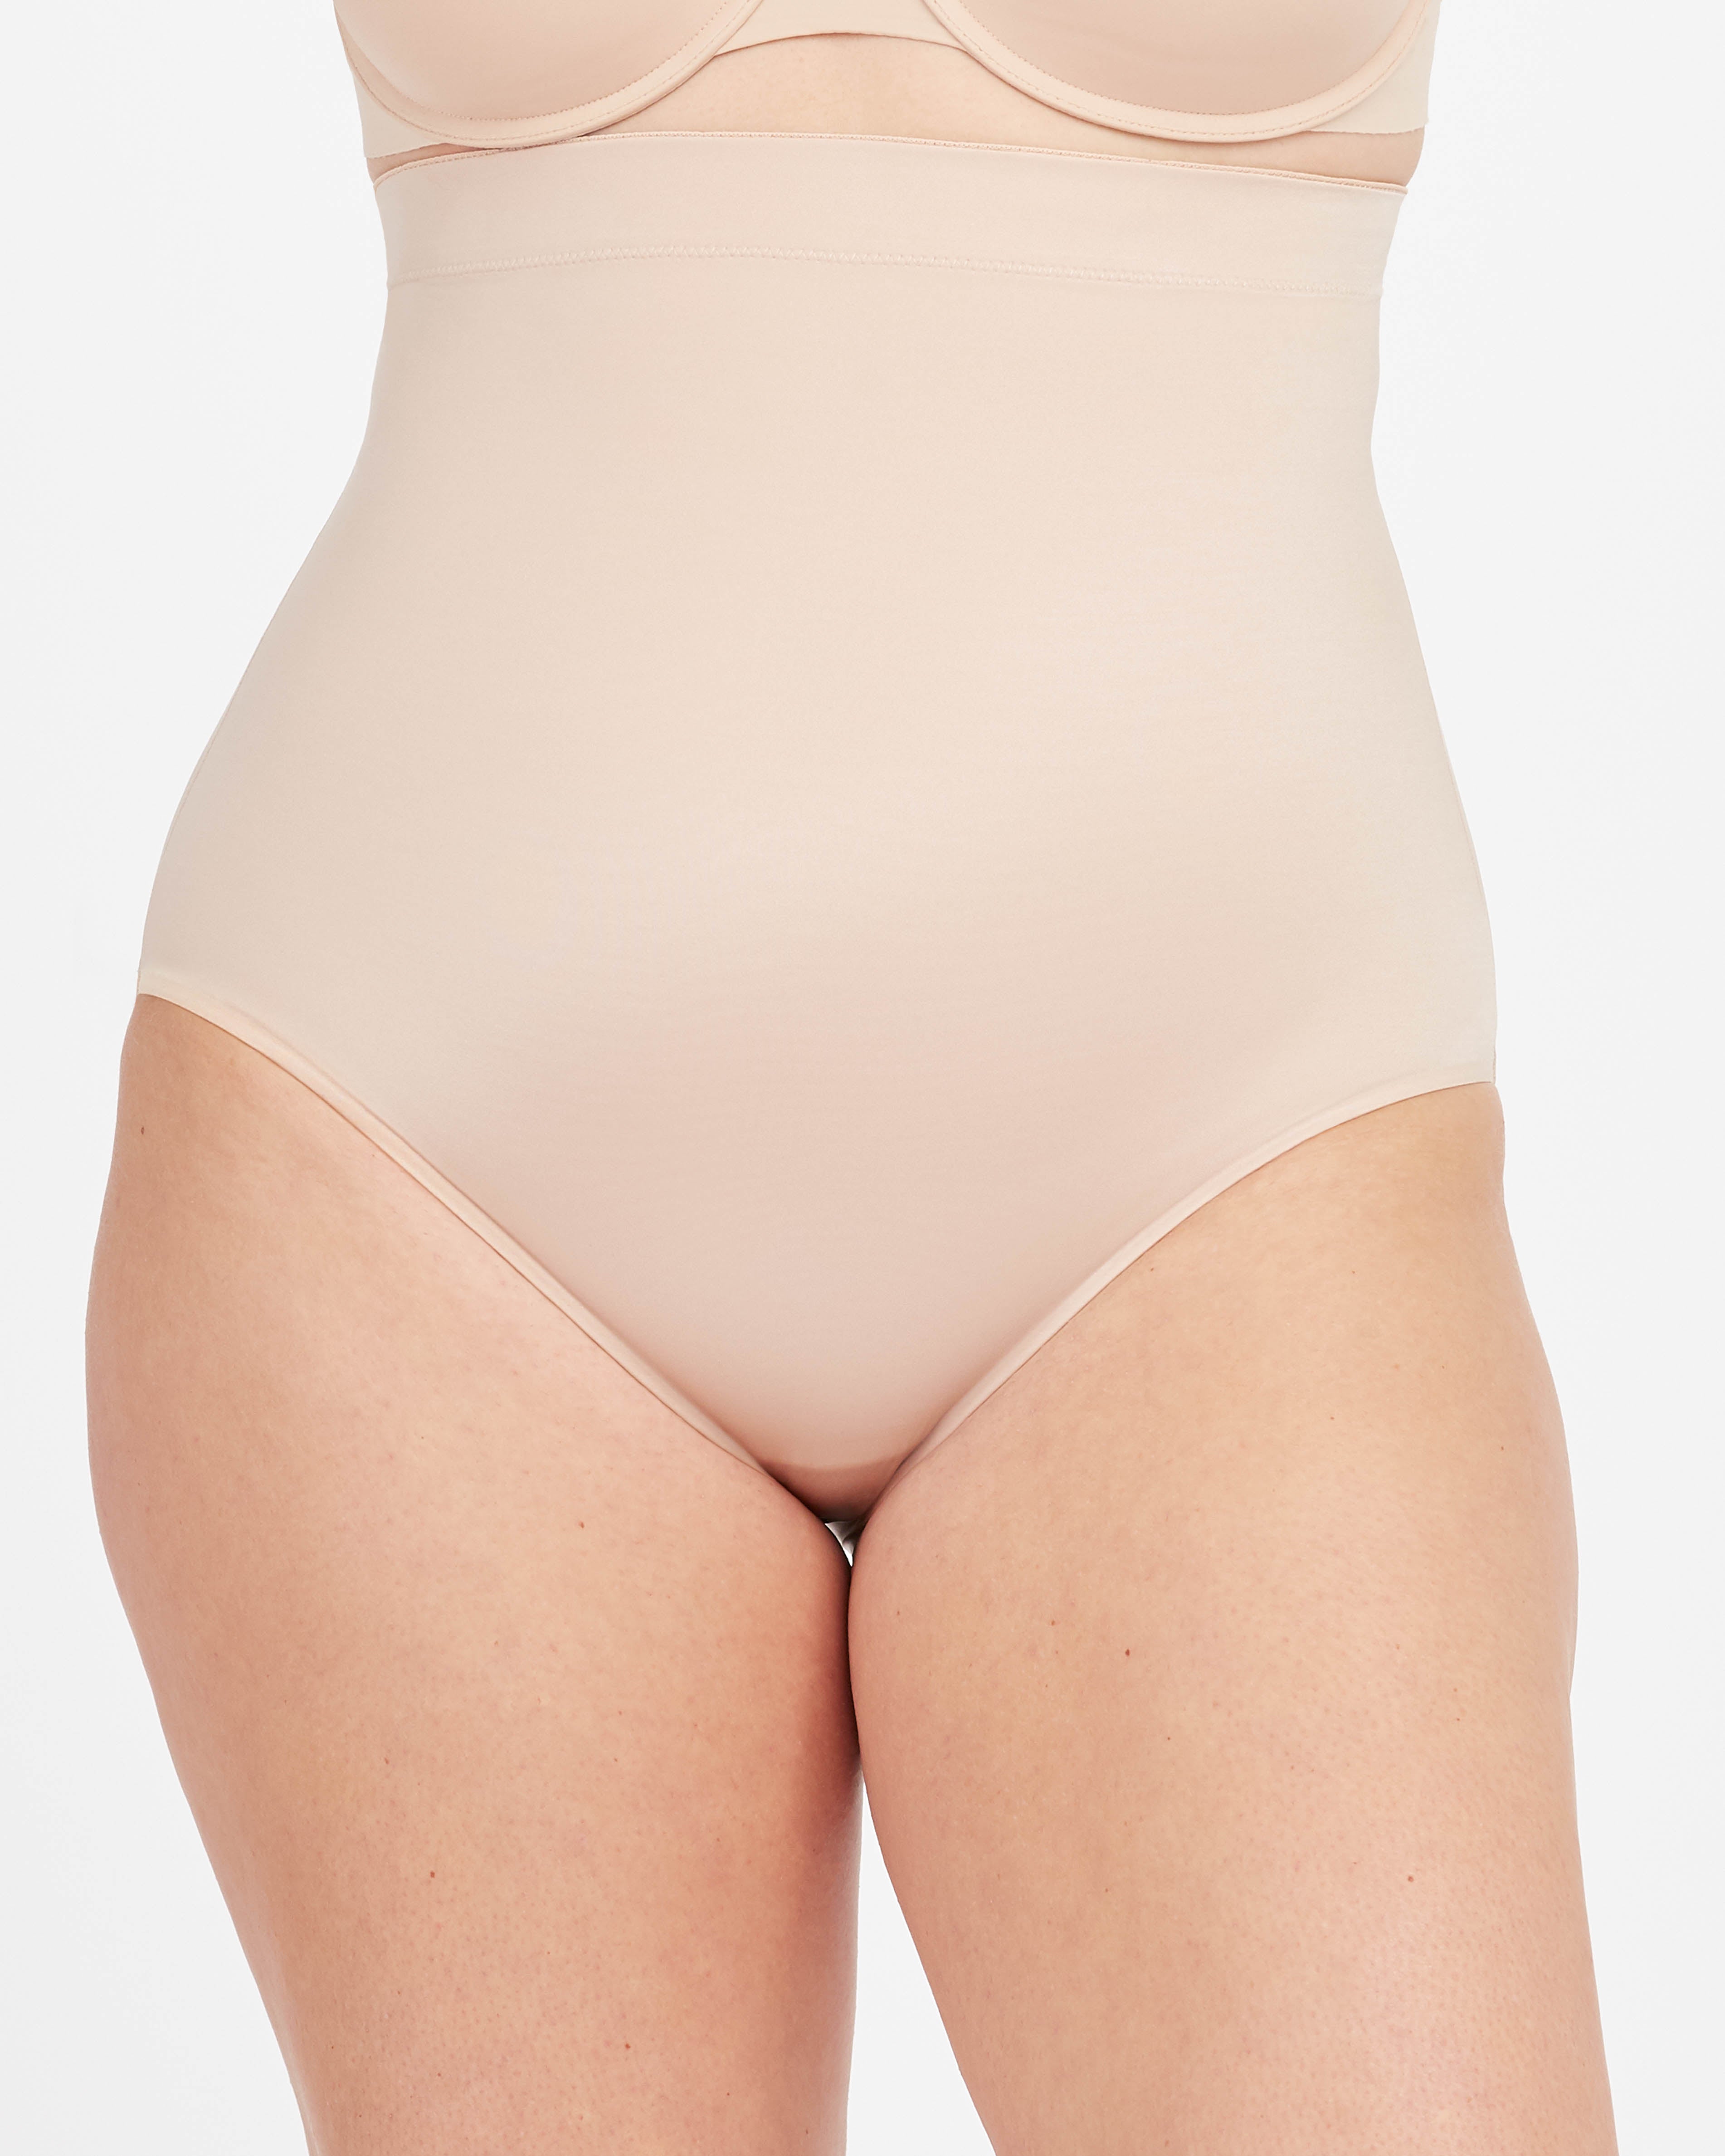 Look chic in this Spanx suit ($178 at spanx.com), SO gold Crush